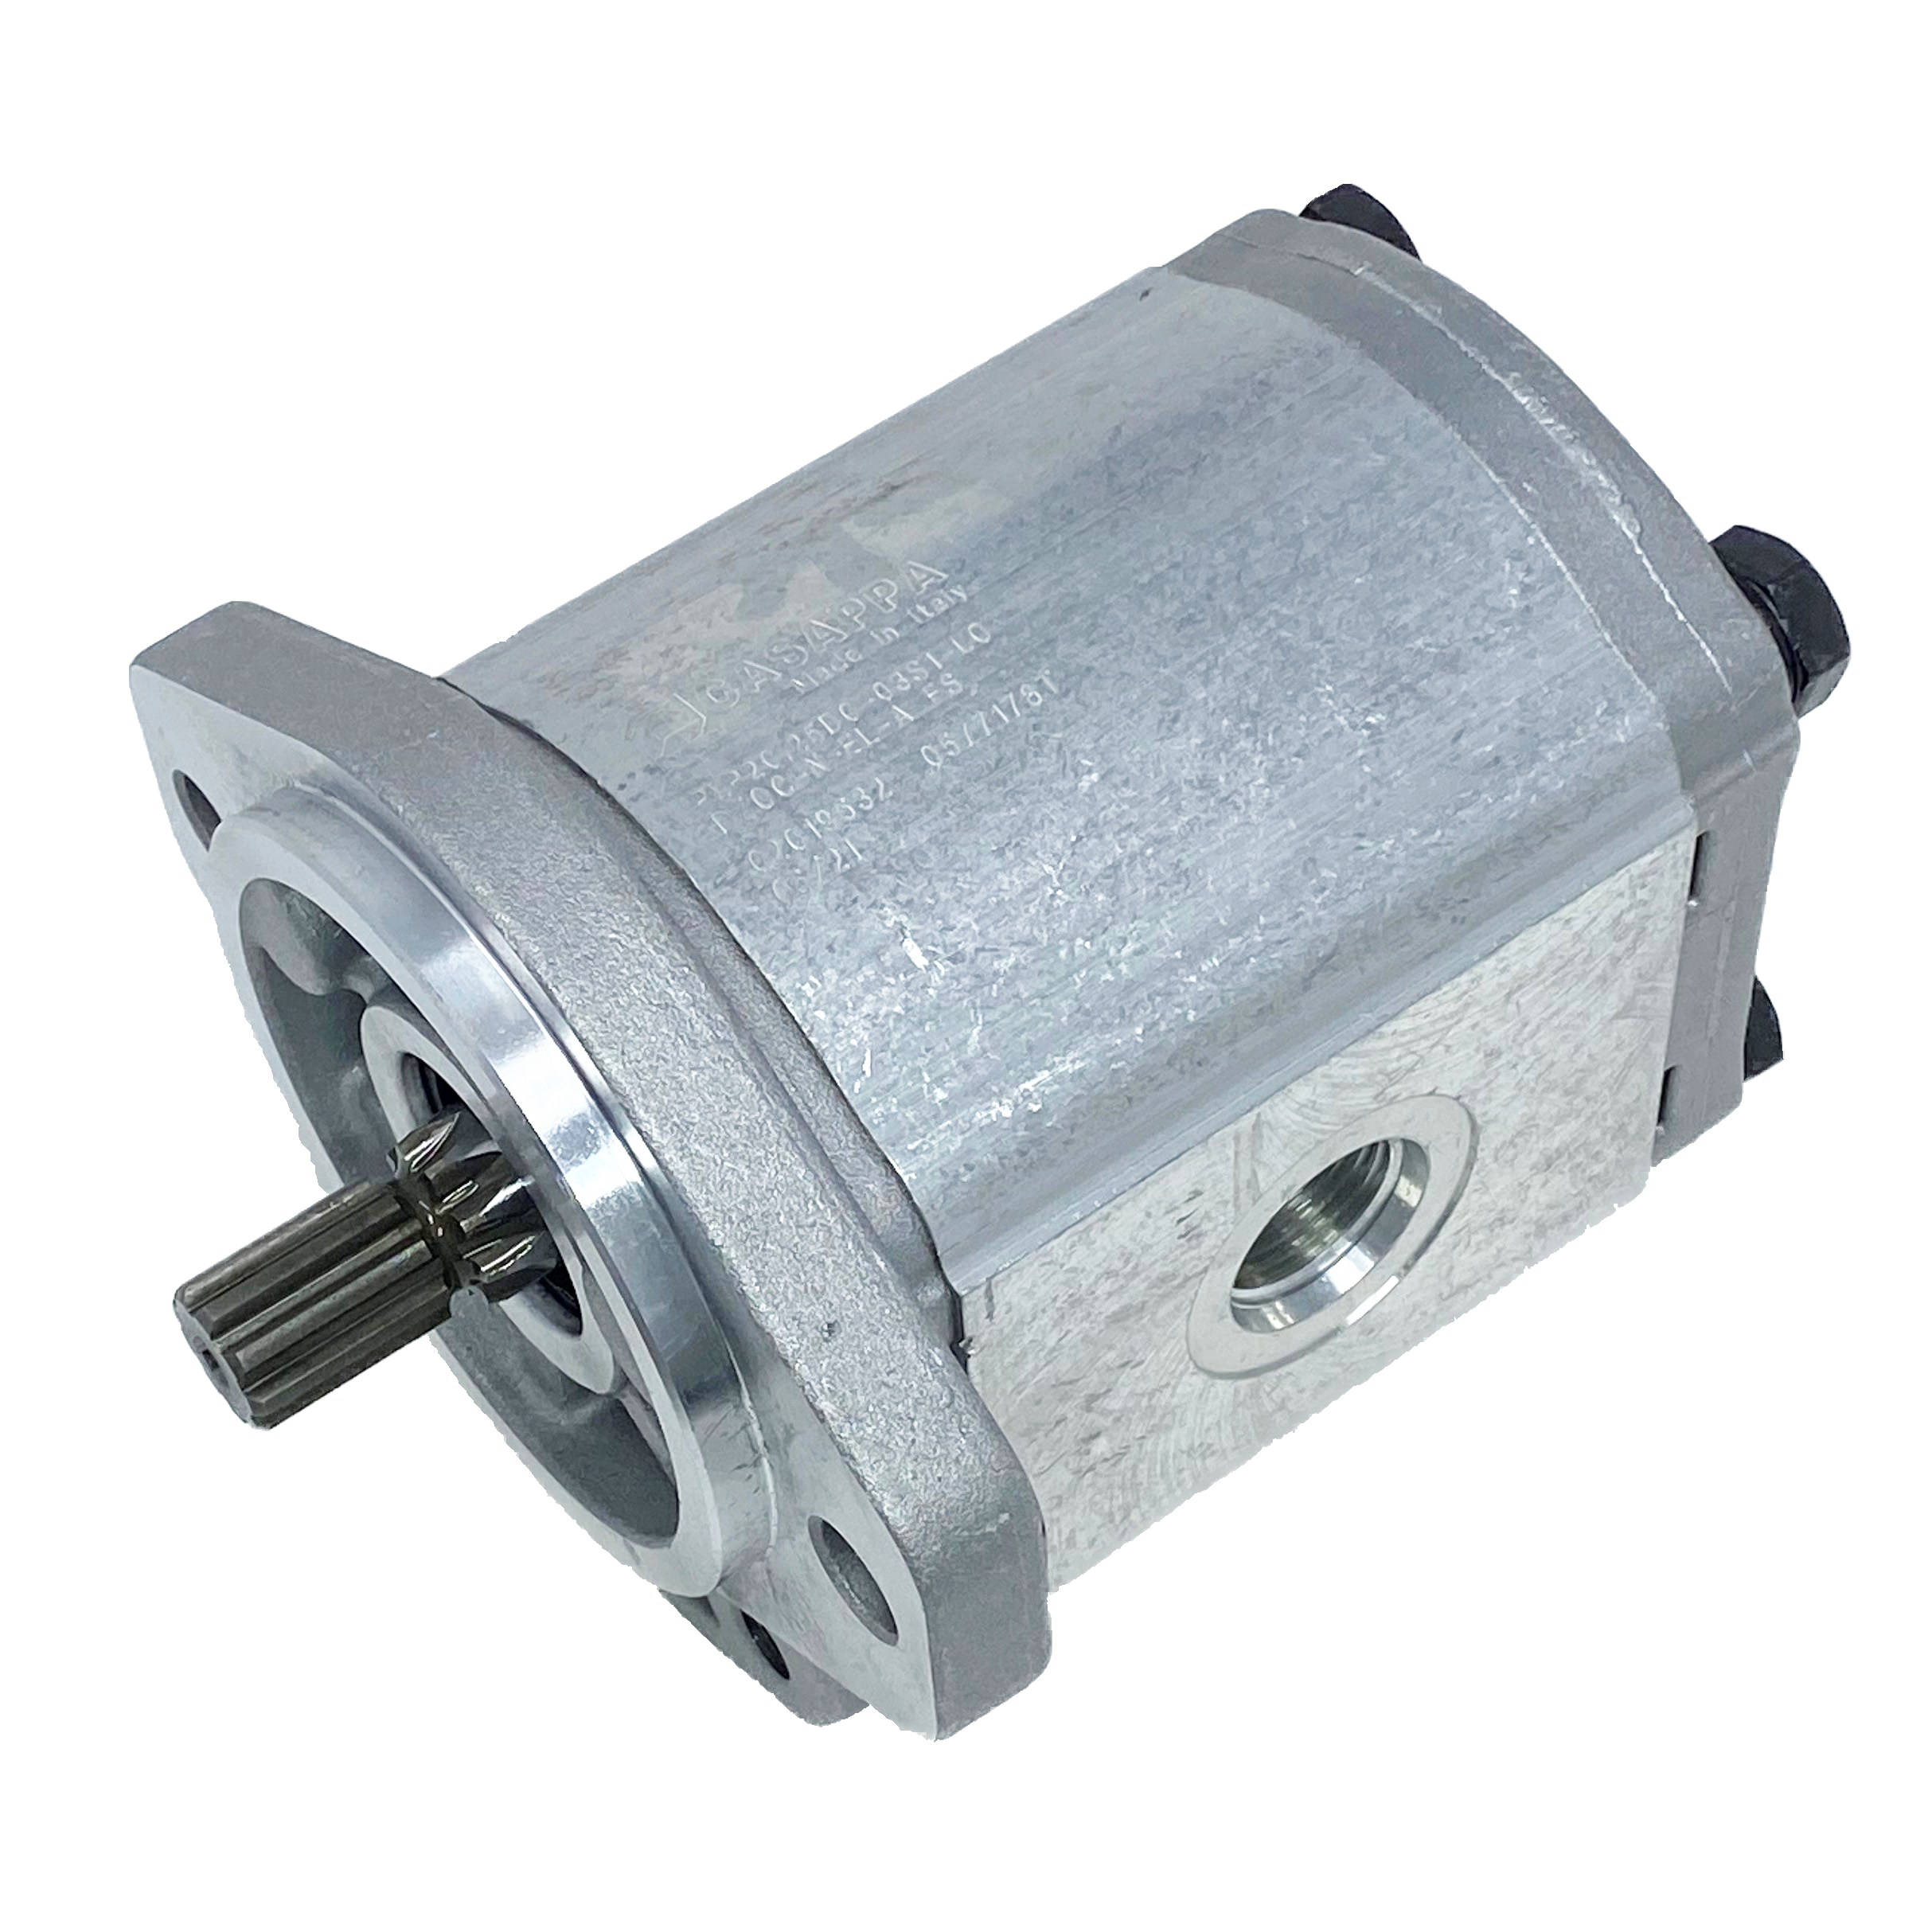 PHP20.25S0-03S9-LOG/OC-N-EL : Casappa Polaris Gear Pump, 26.42cc, 3335psi Rated, 3000RPM, CCW, 9T 16/32dp Shaft, SAE A 2-Bolt Flange, 1.25" #20 SAE Inlet, 0.625 (5/8") #10 SAE Outlet, Cast Iron Body, Aluminum Flange